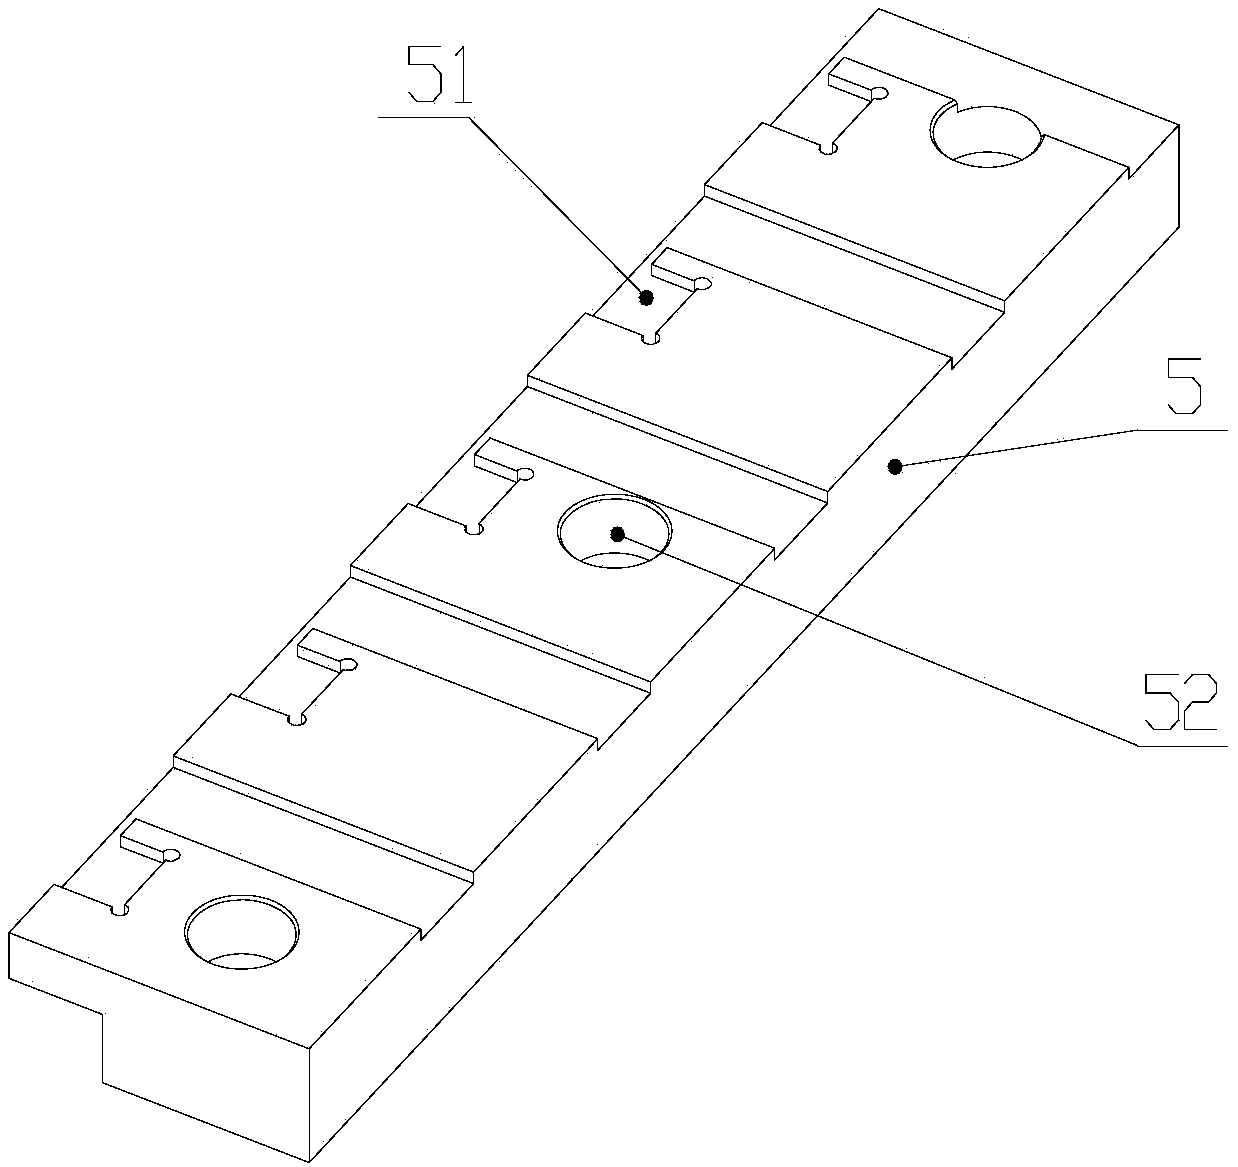 Multi-station clamp for small part processing